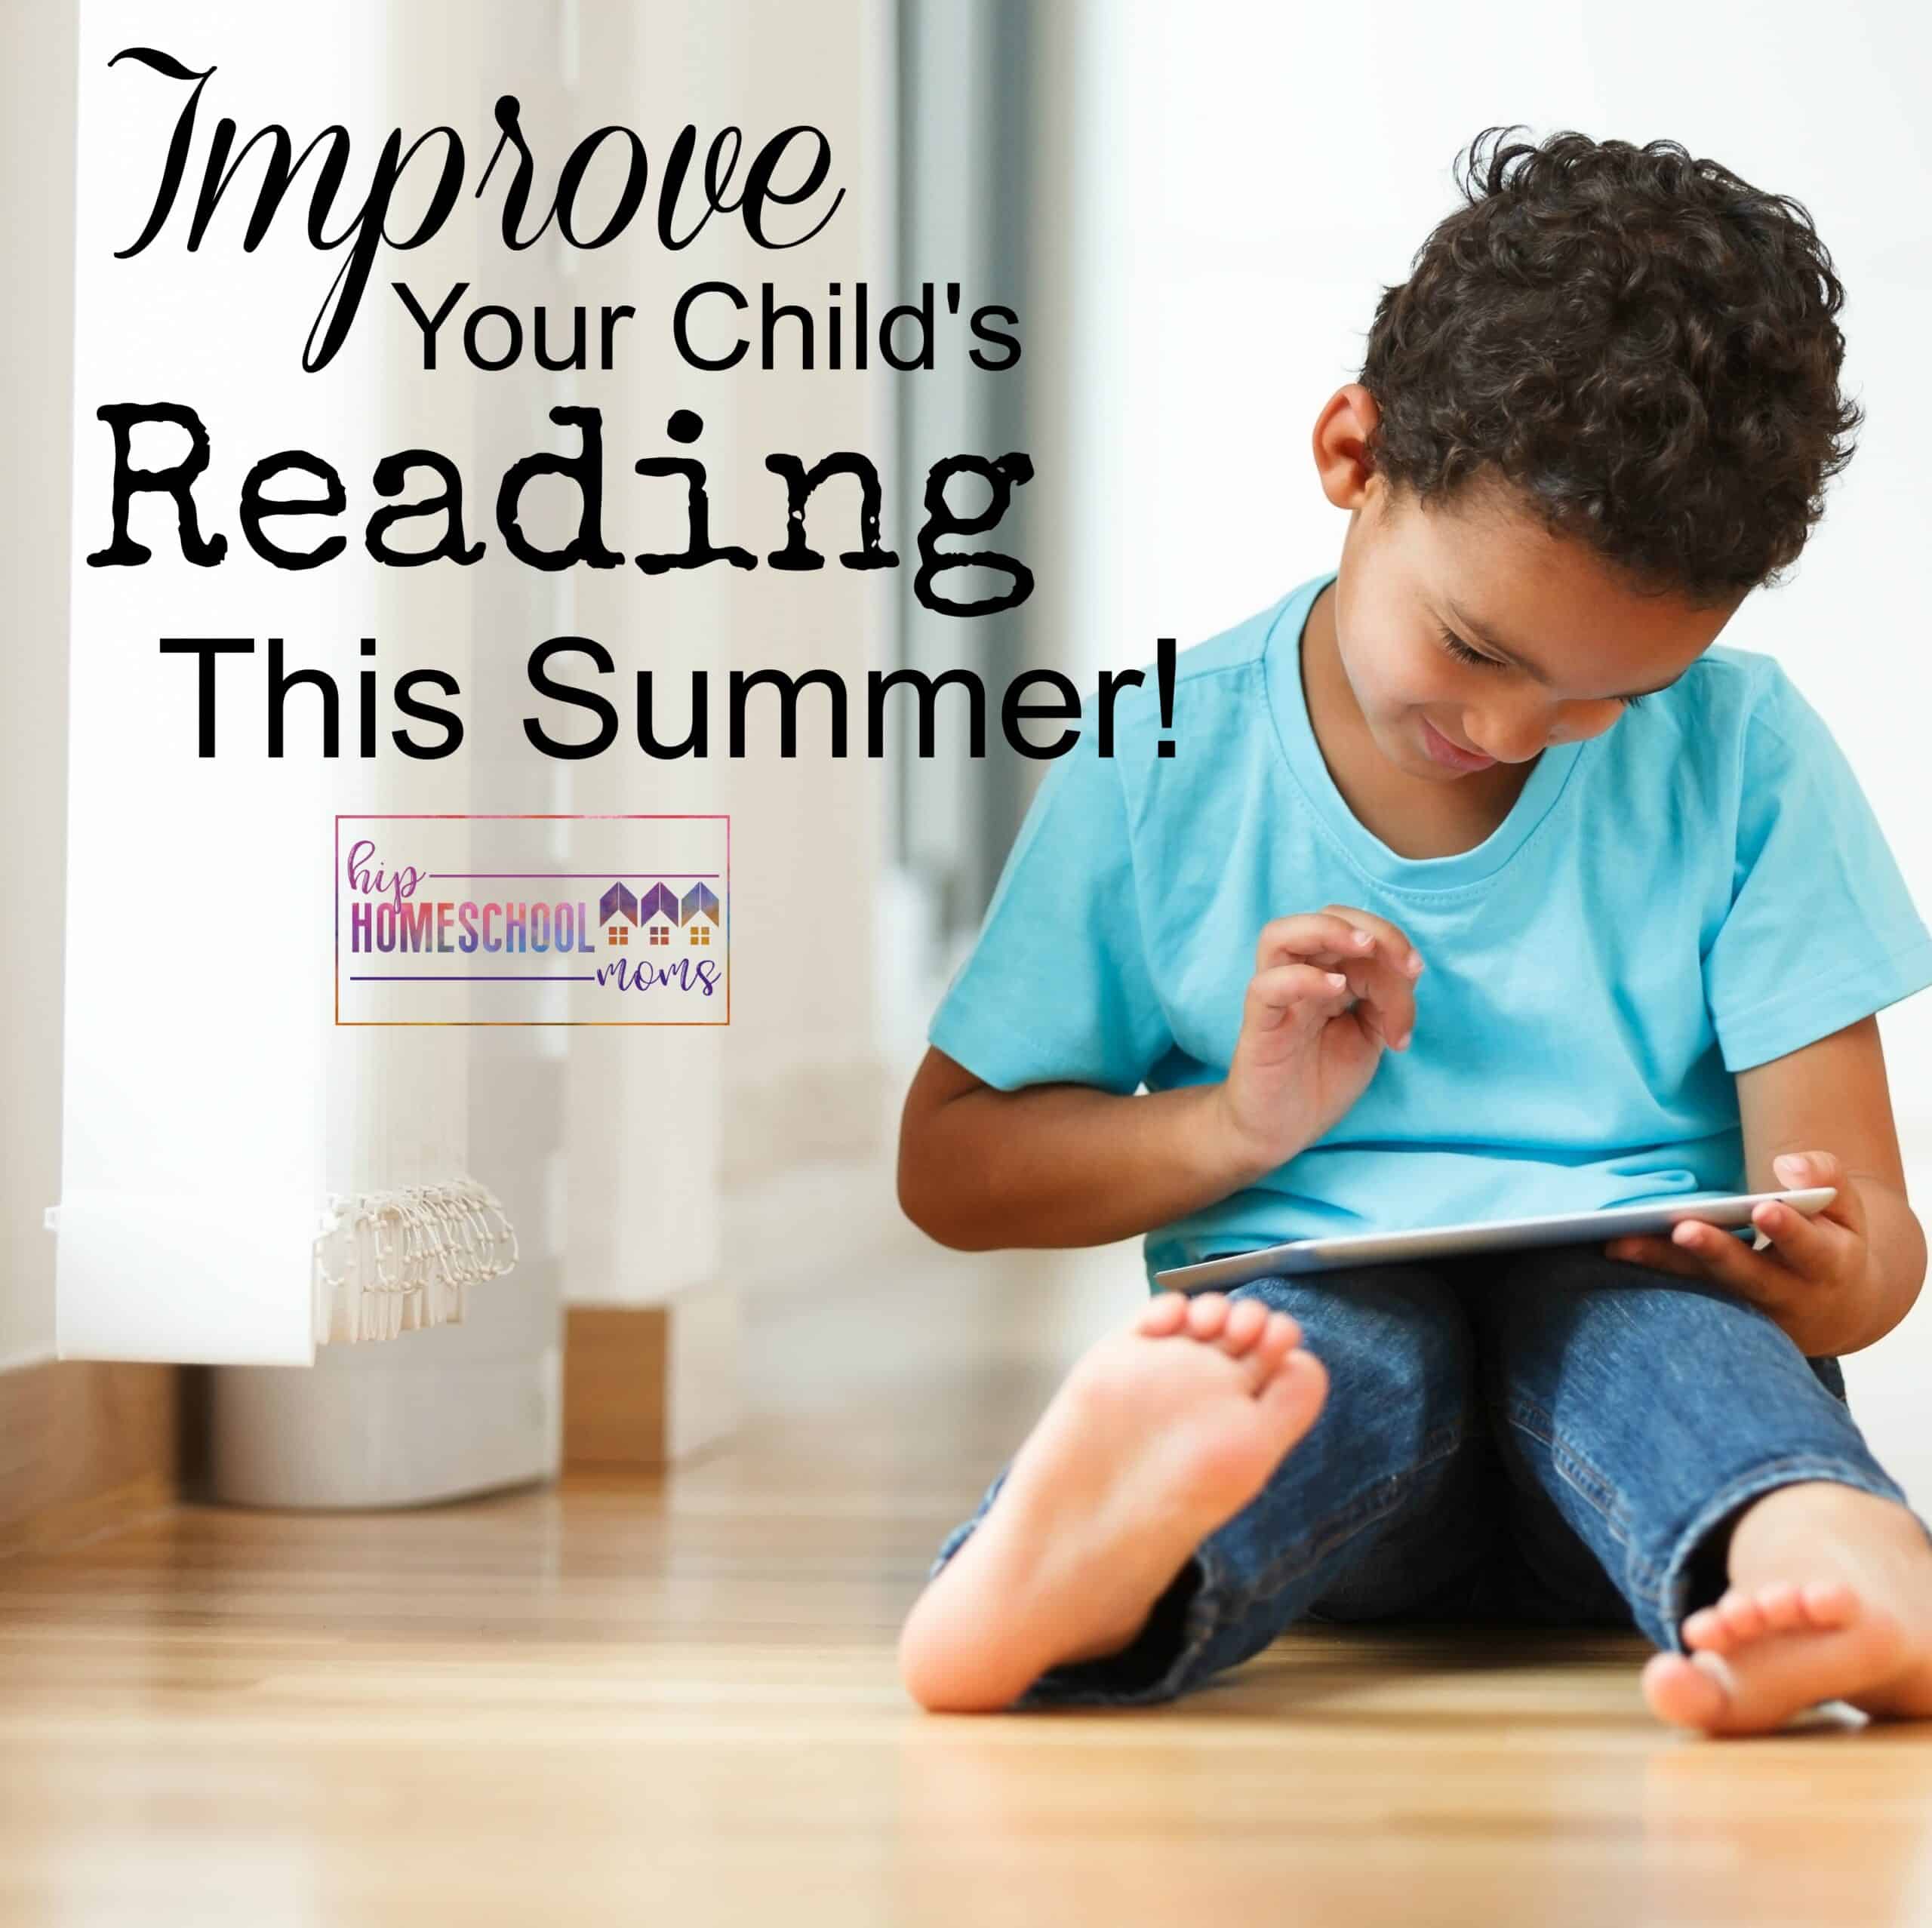 Improve Your Child’s Reading This Summer!